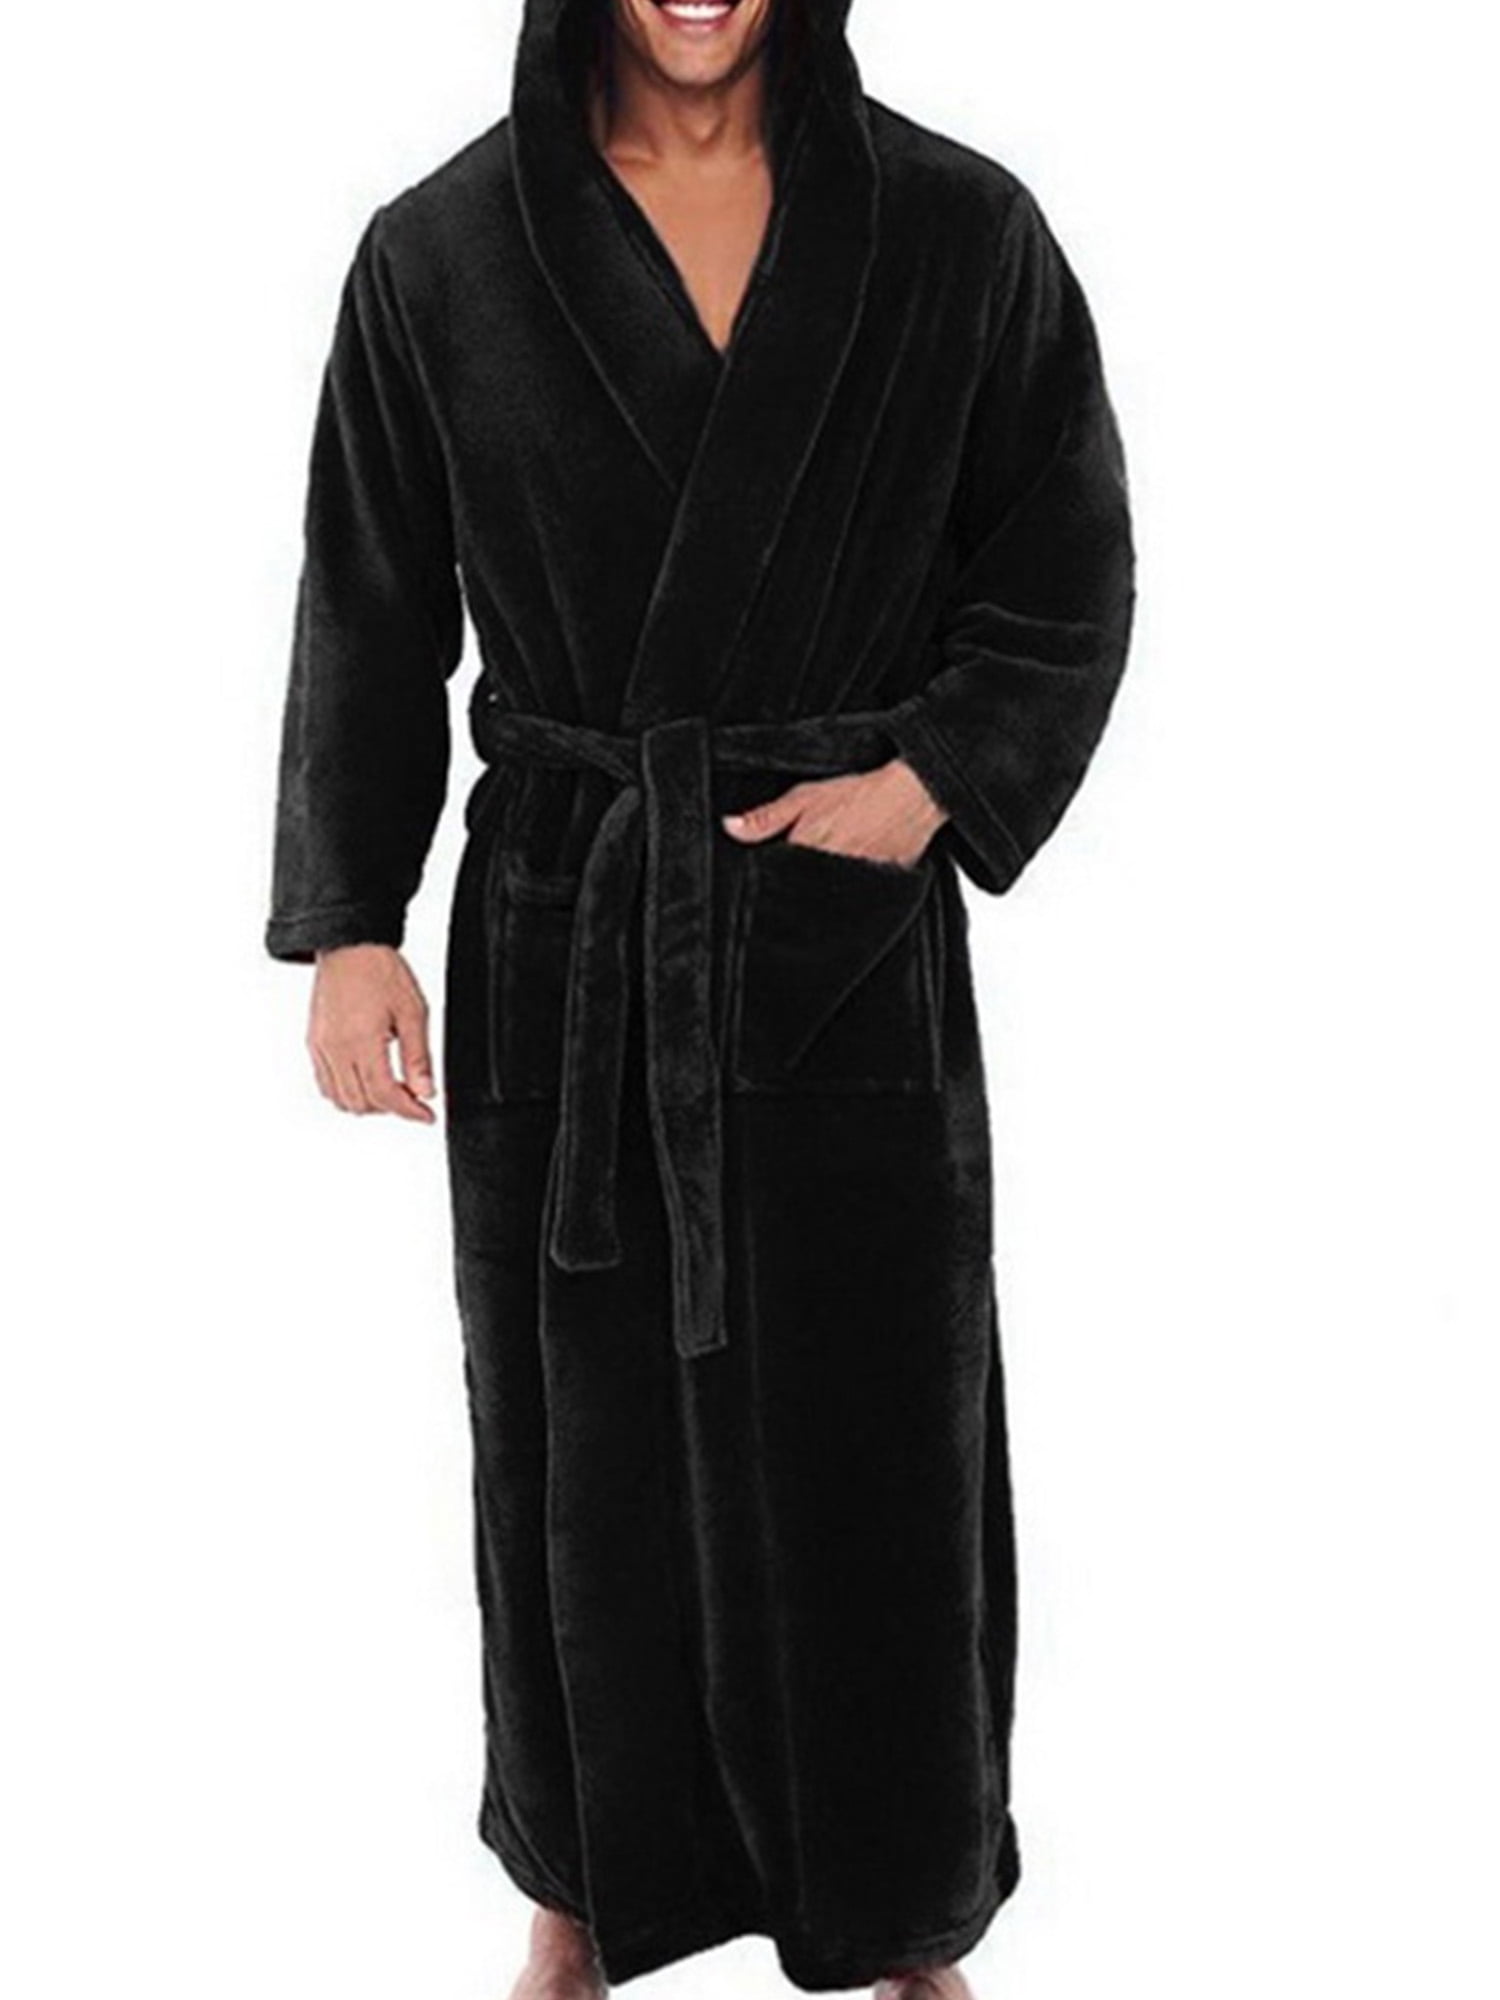 Mens Contare Cotton Terry Towelling Dressing Gown Bath Robe Blue